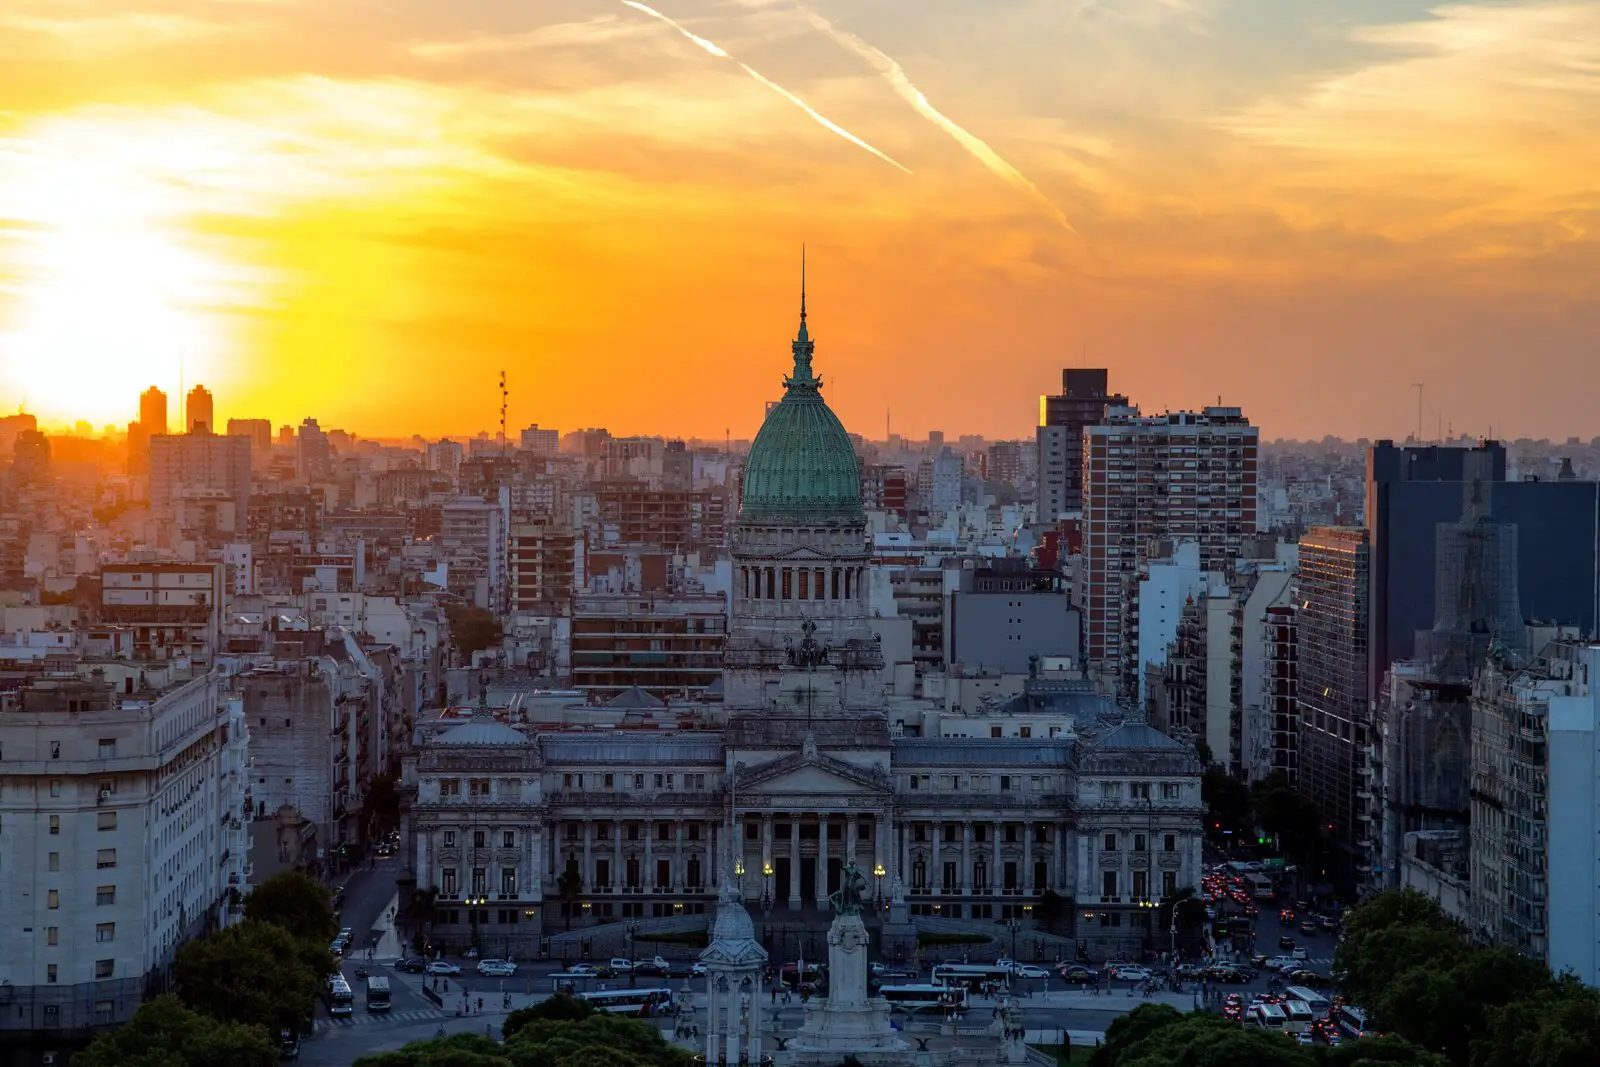 Theater, Cinema, Art and more: A Culture Guide to Buenos Aires